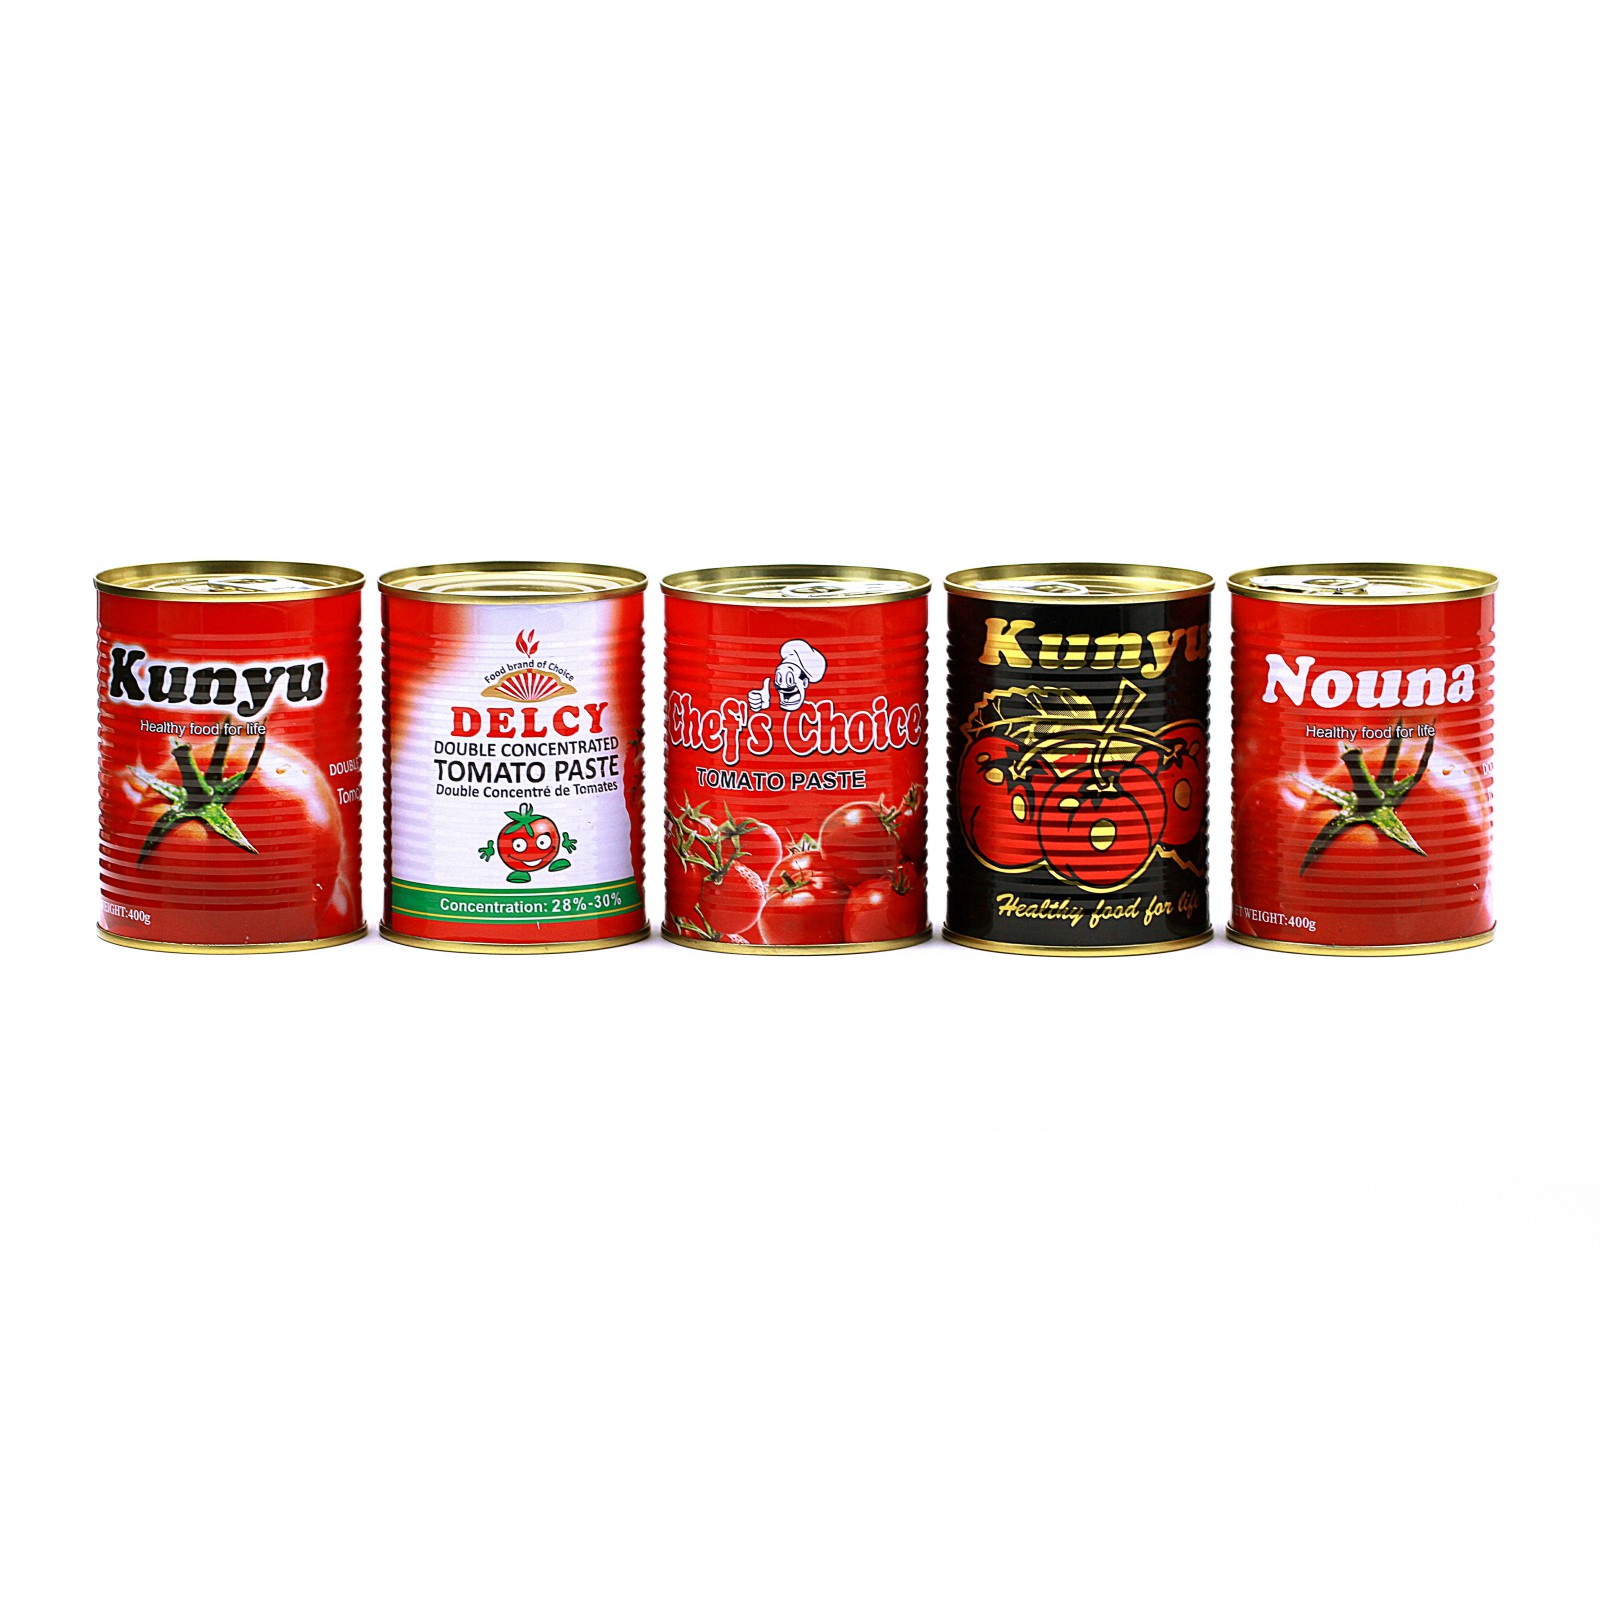 Canned tomato paste 400g